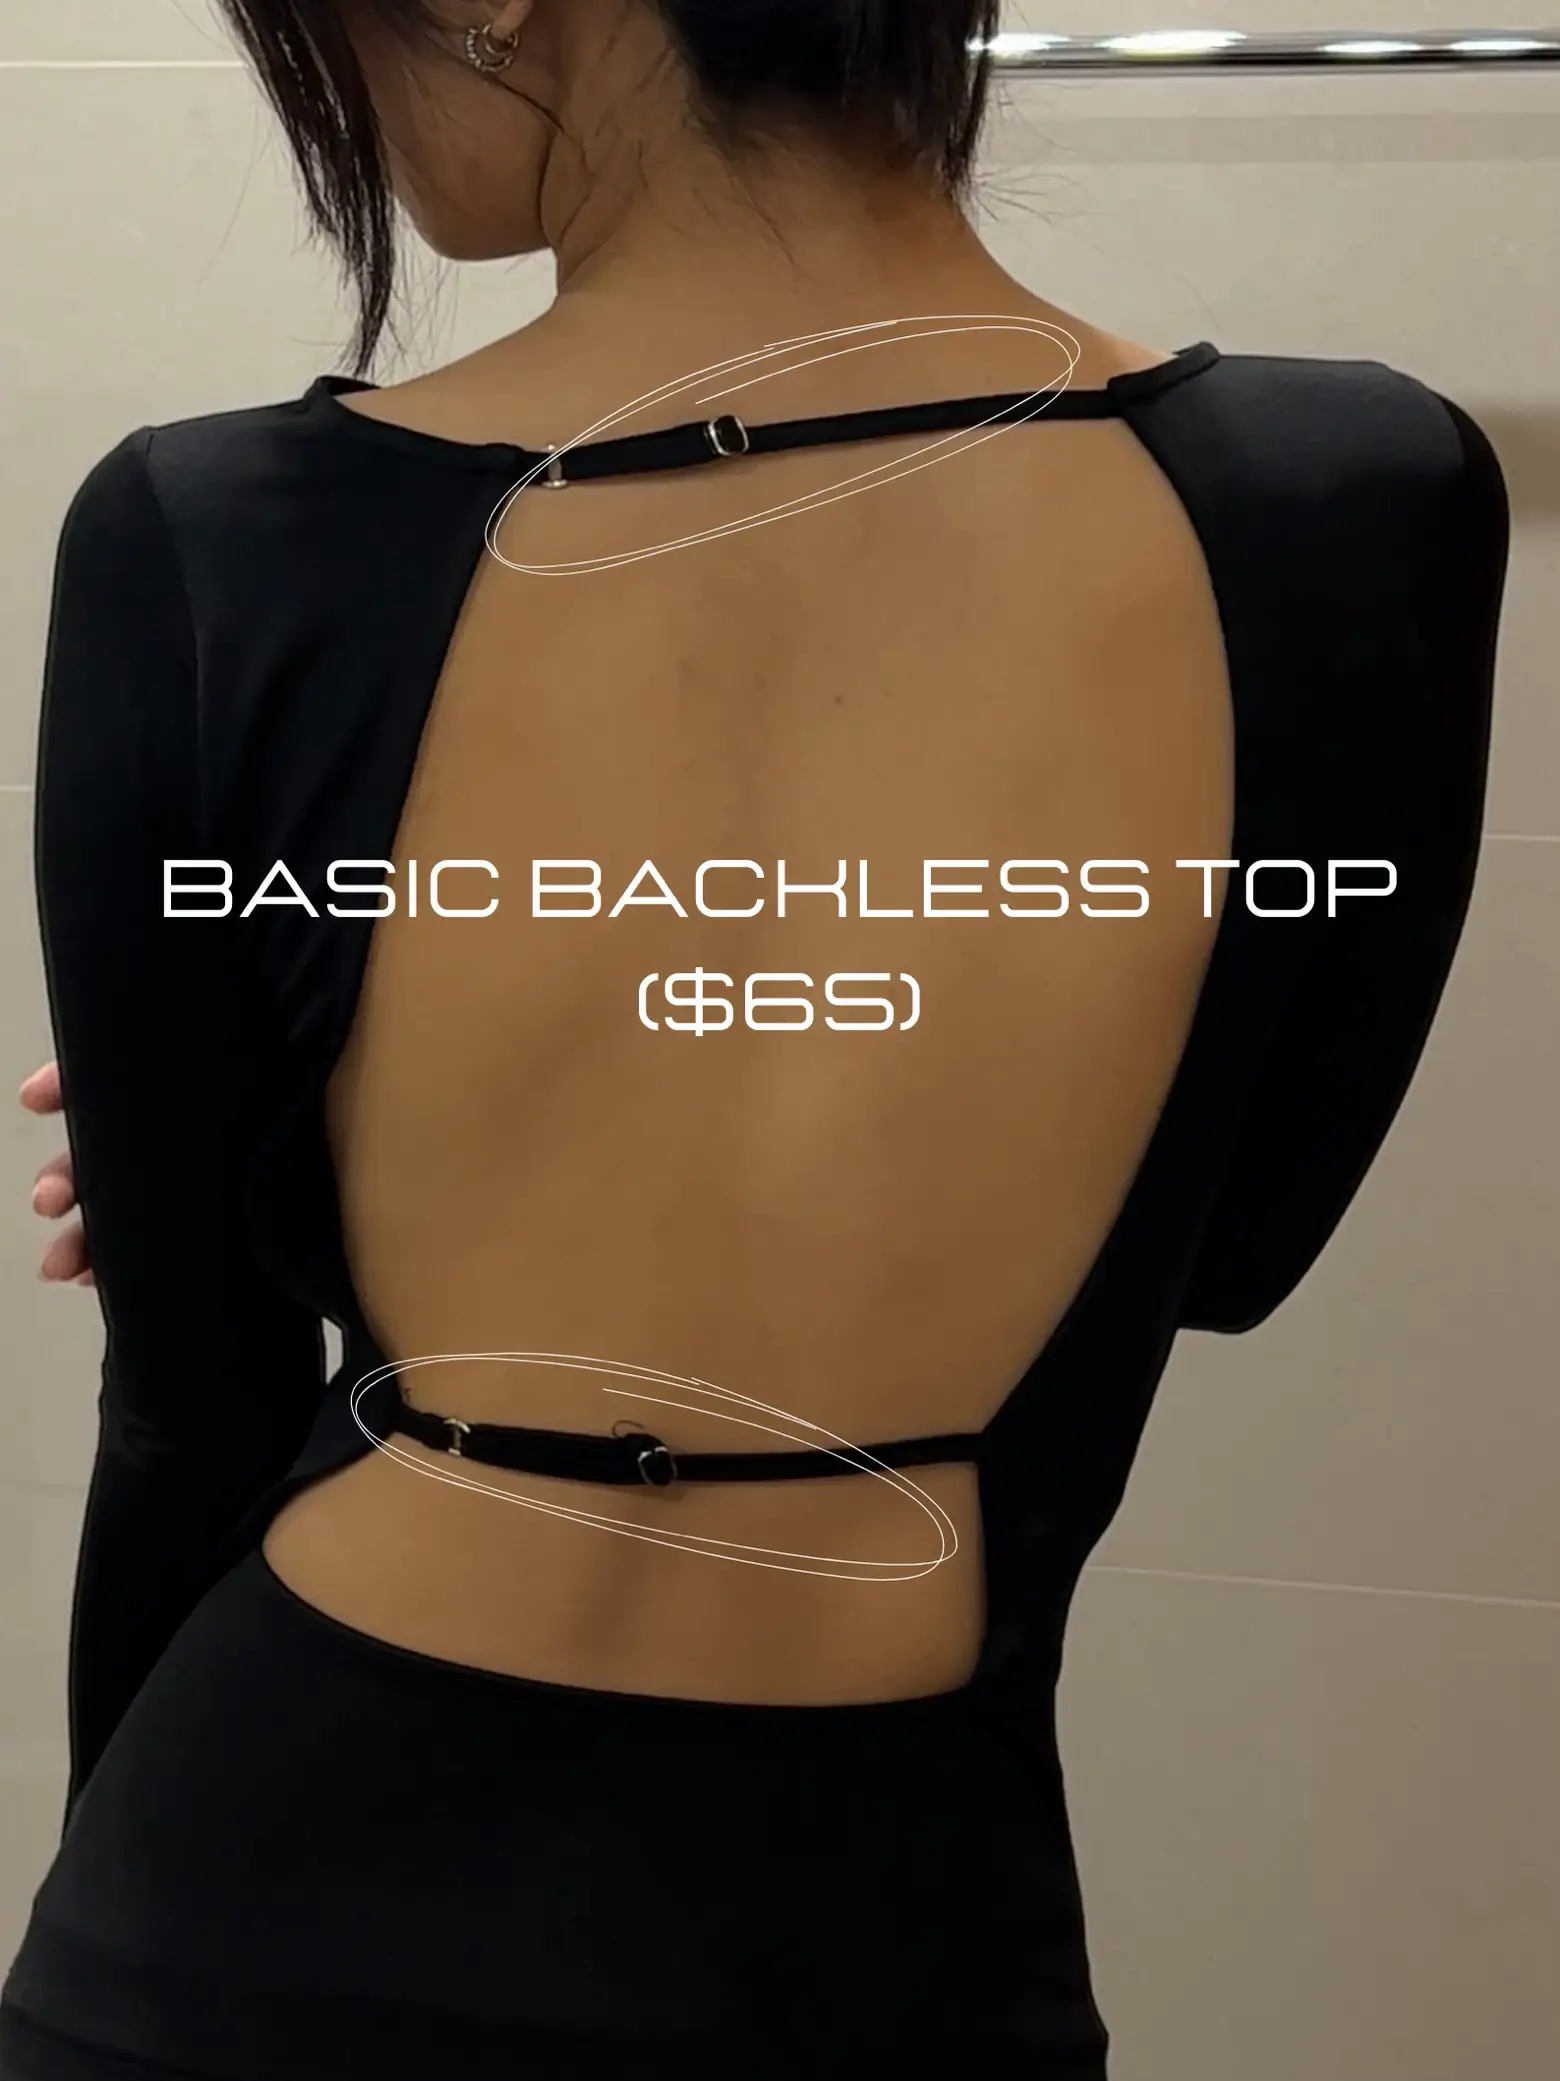 THE BEST $7 BACKLESS TOP 🖤, Gallery posted by Natasha Lee